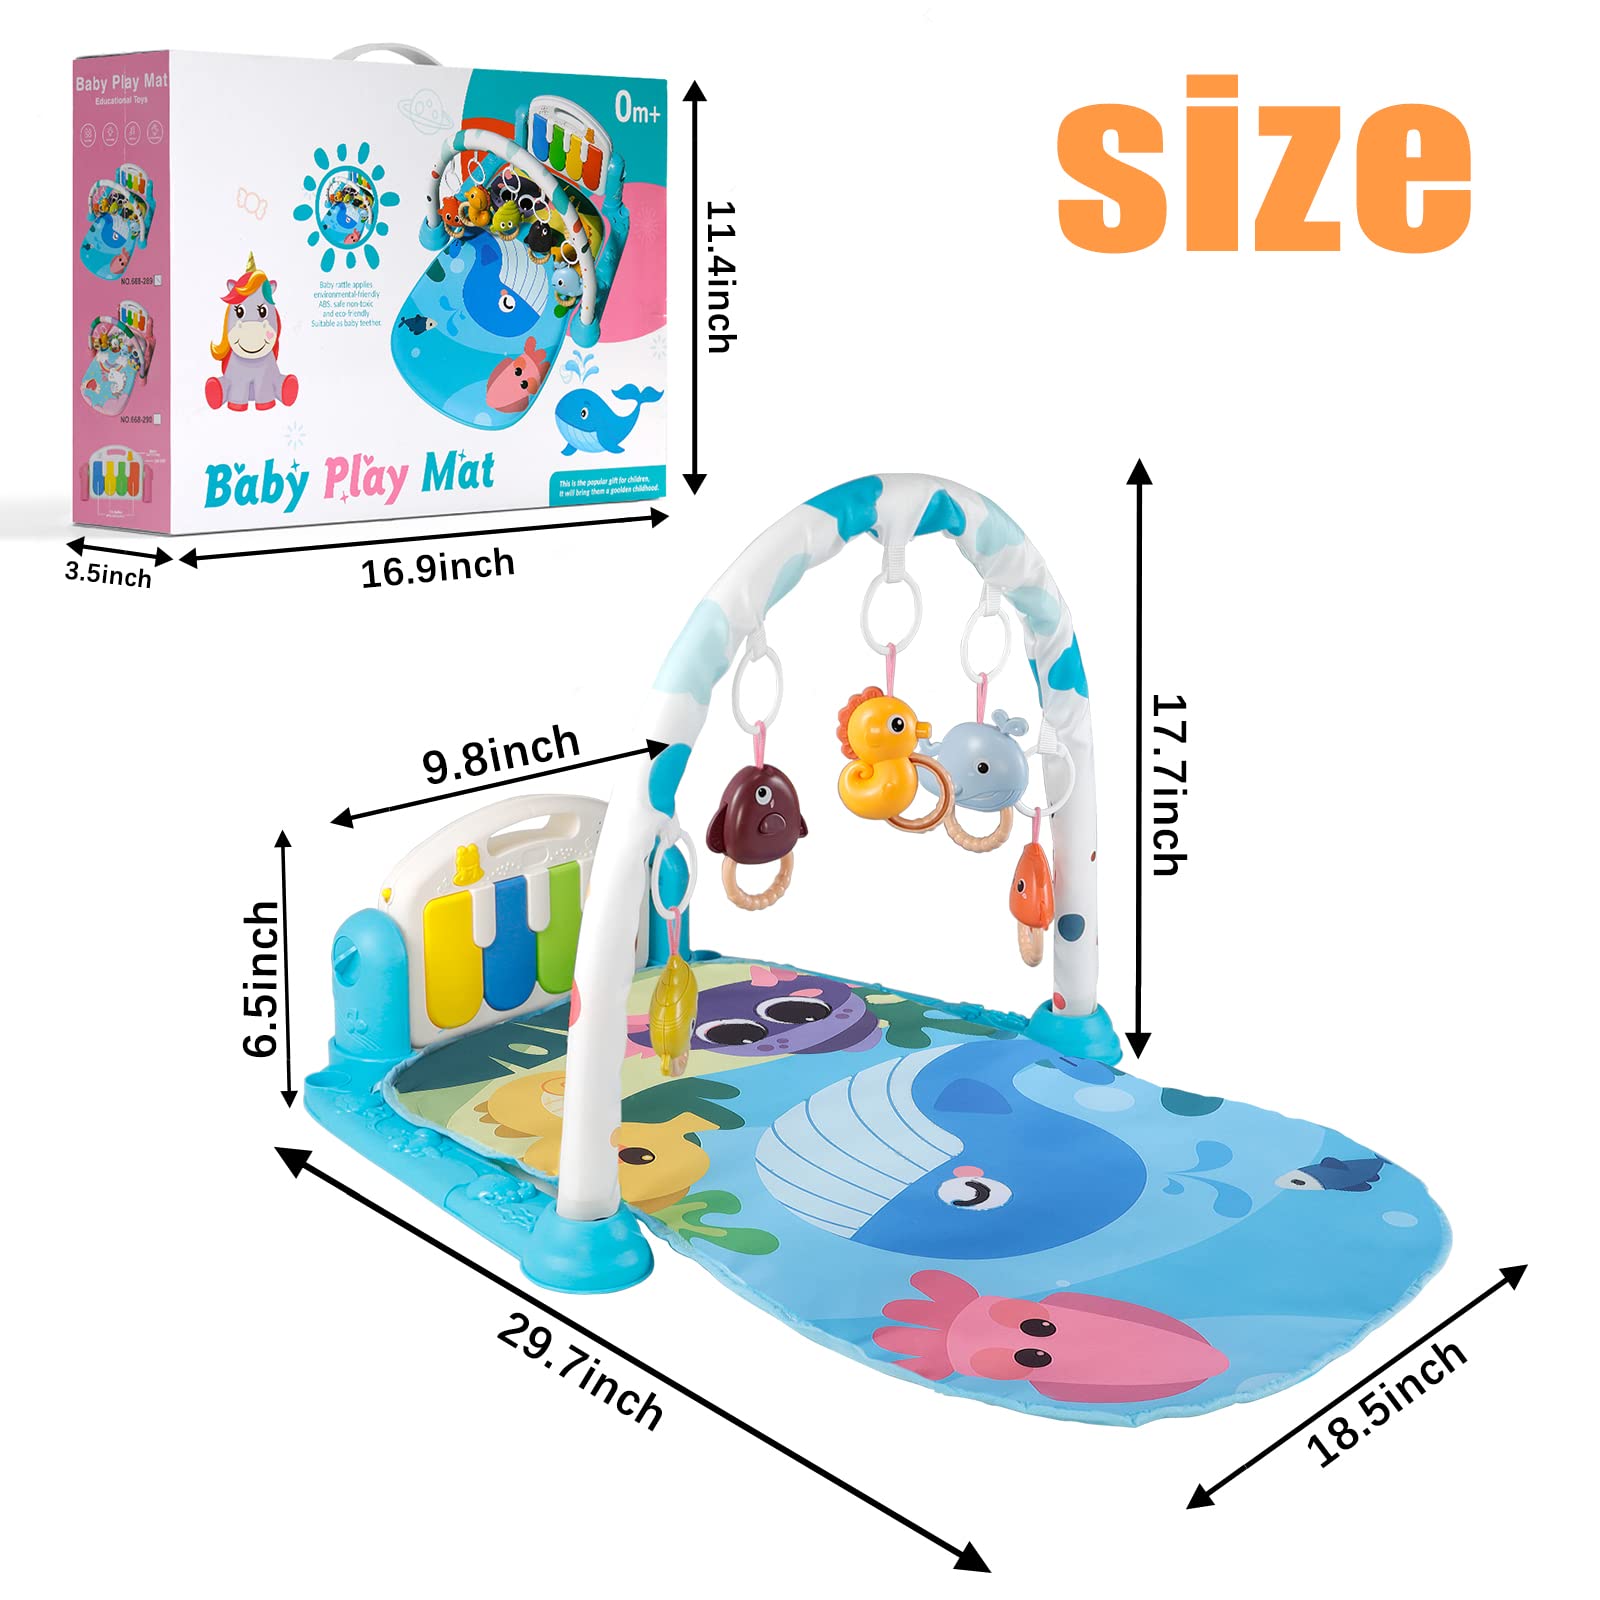 Baby Play Mat, Play Piano Gym Activity Mat Musical Light Activity Center Toys Gift for Newborn Infants Toddlers 0 to 3 6 9 12 Months